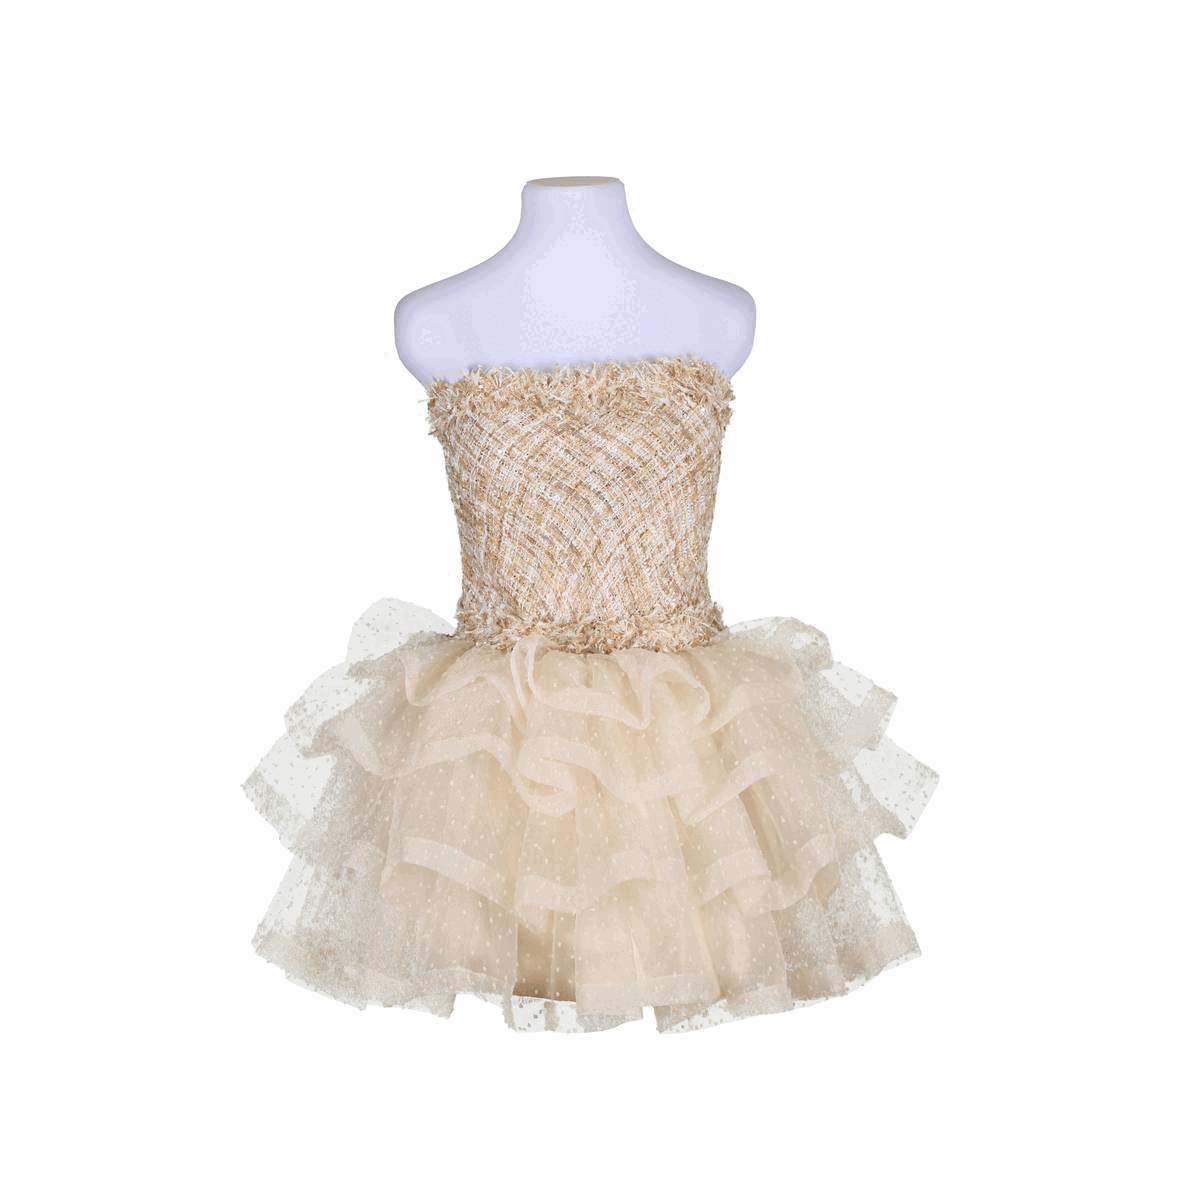 Tweed strapless bodice and organza layered skirt